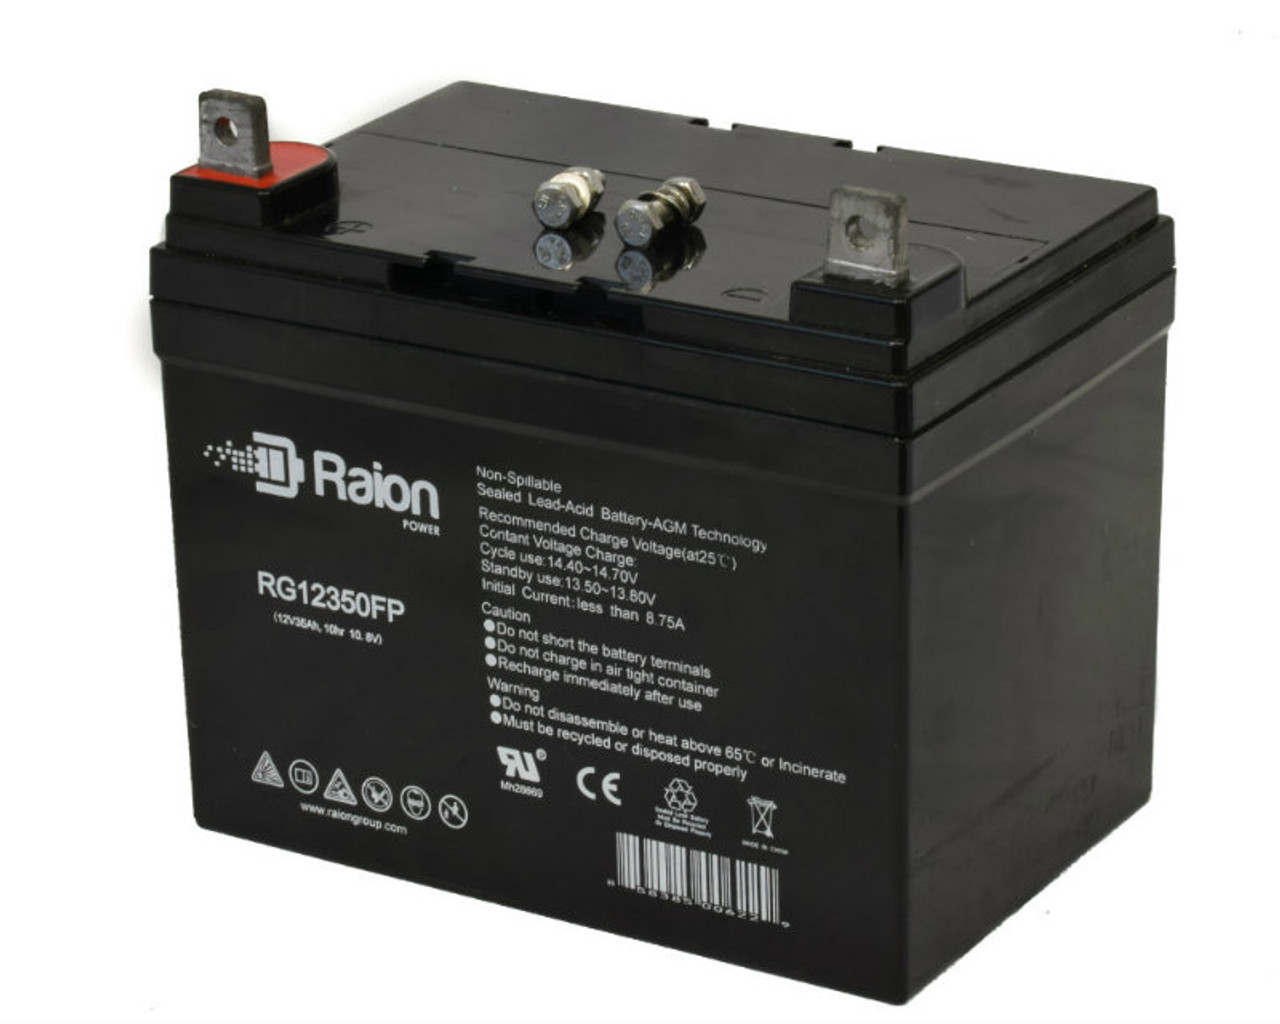 Raion Power Replacement 12V 35Ah RG12350FP Battery for Scotts (By Murray) 50563X8